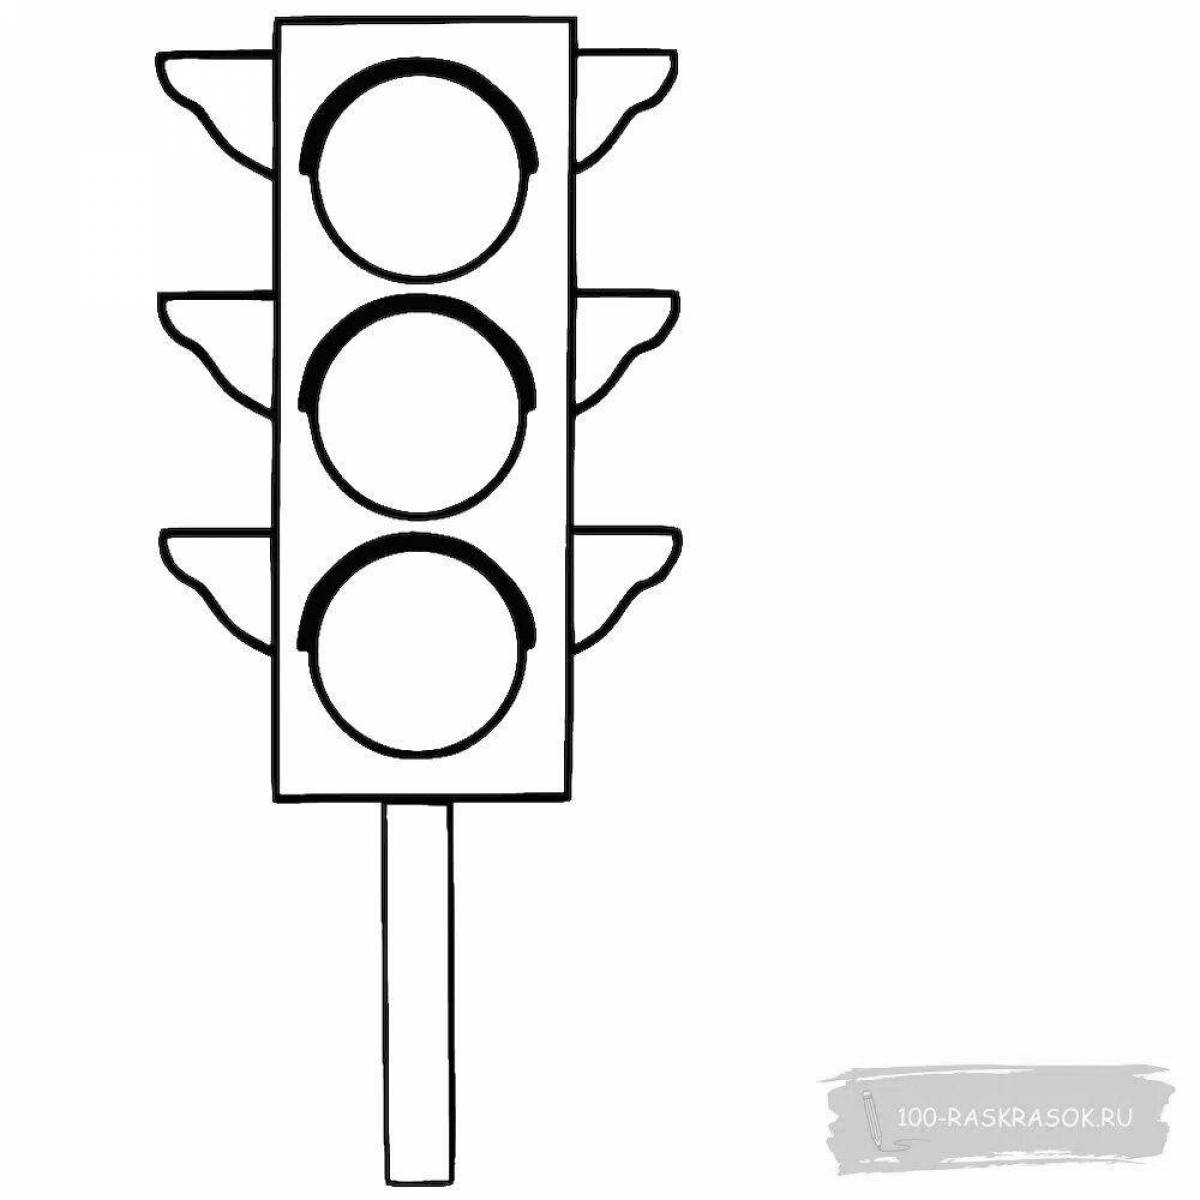 Colorful traffic light coloring page for 2-3 year olds